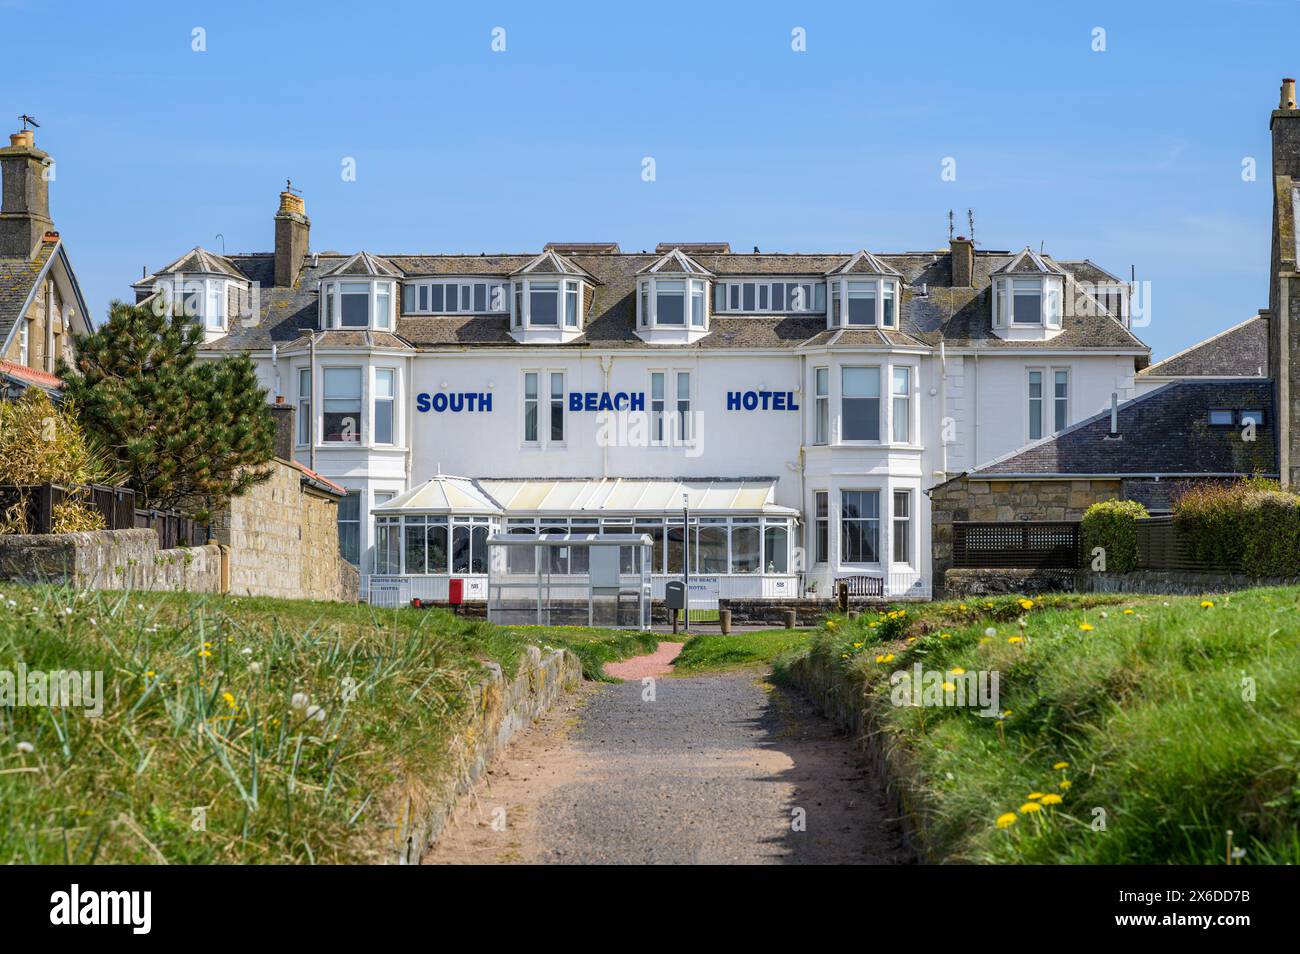 South Beach Hotel, Troon, South Ayrshire, Écosse, Royaume-Uni, Europe Banque D'Images